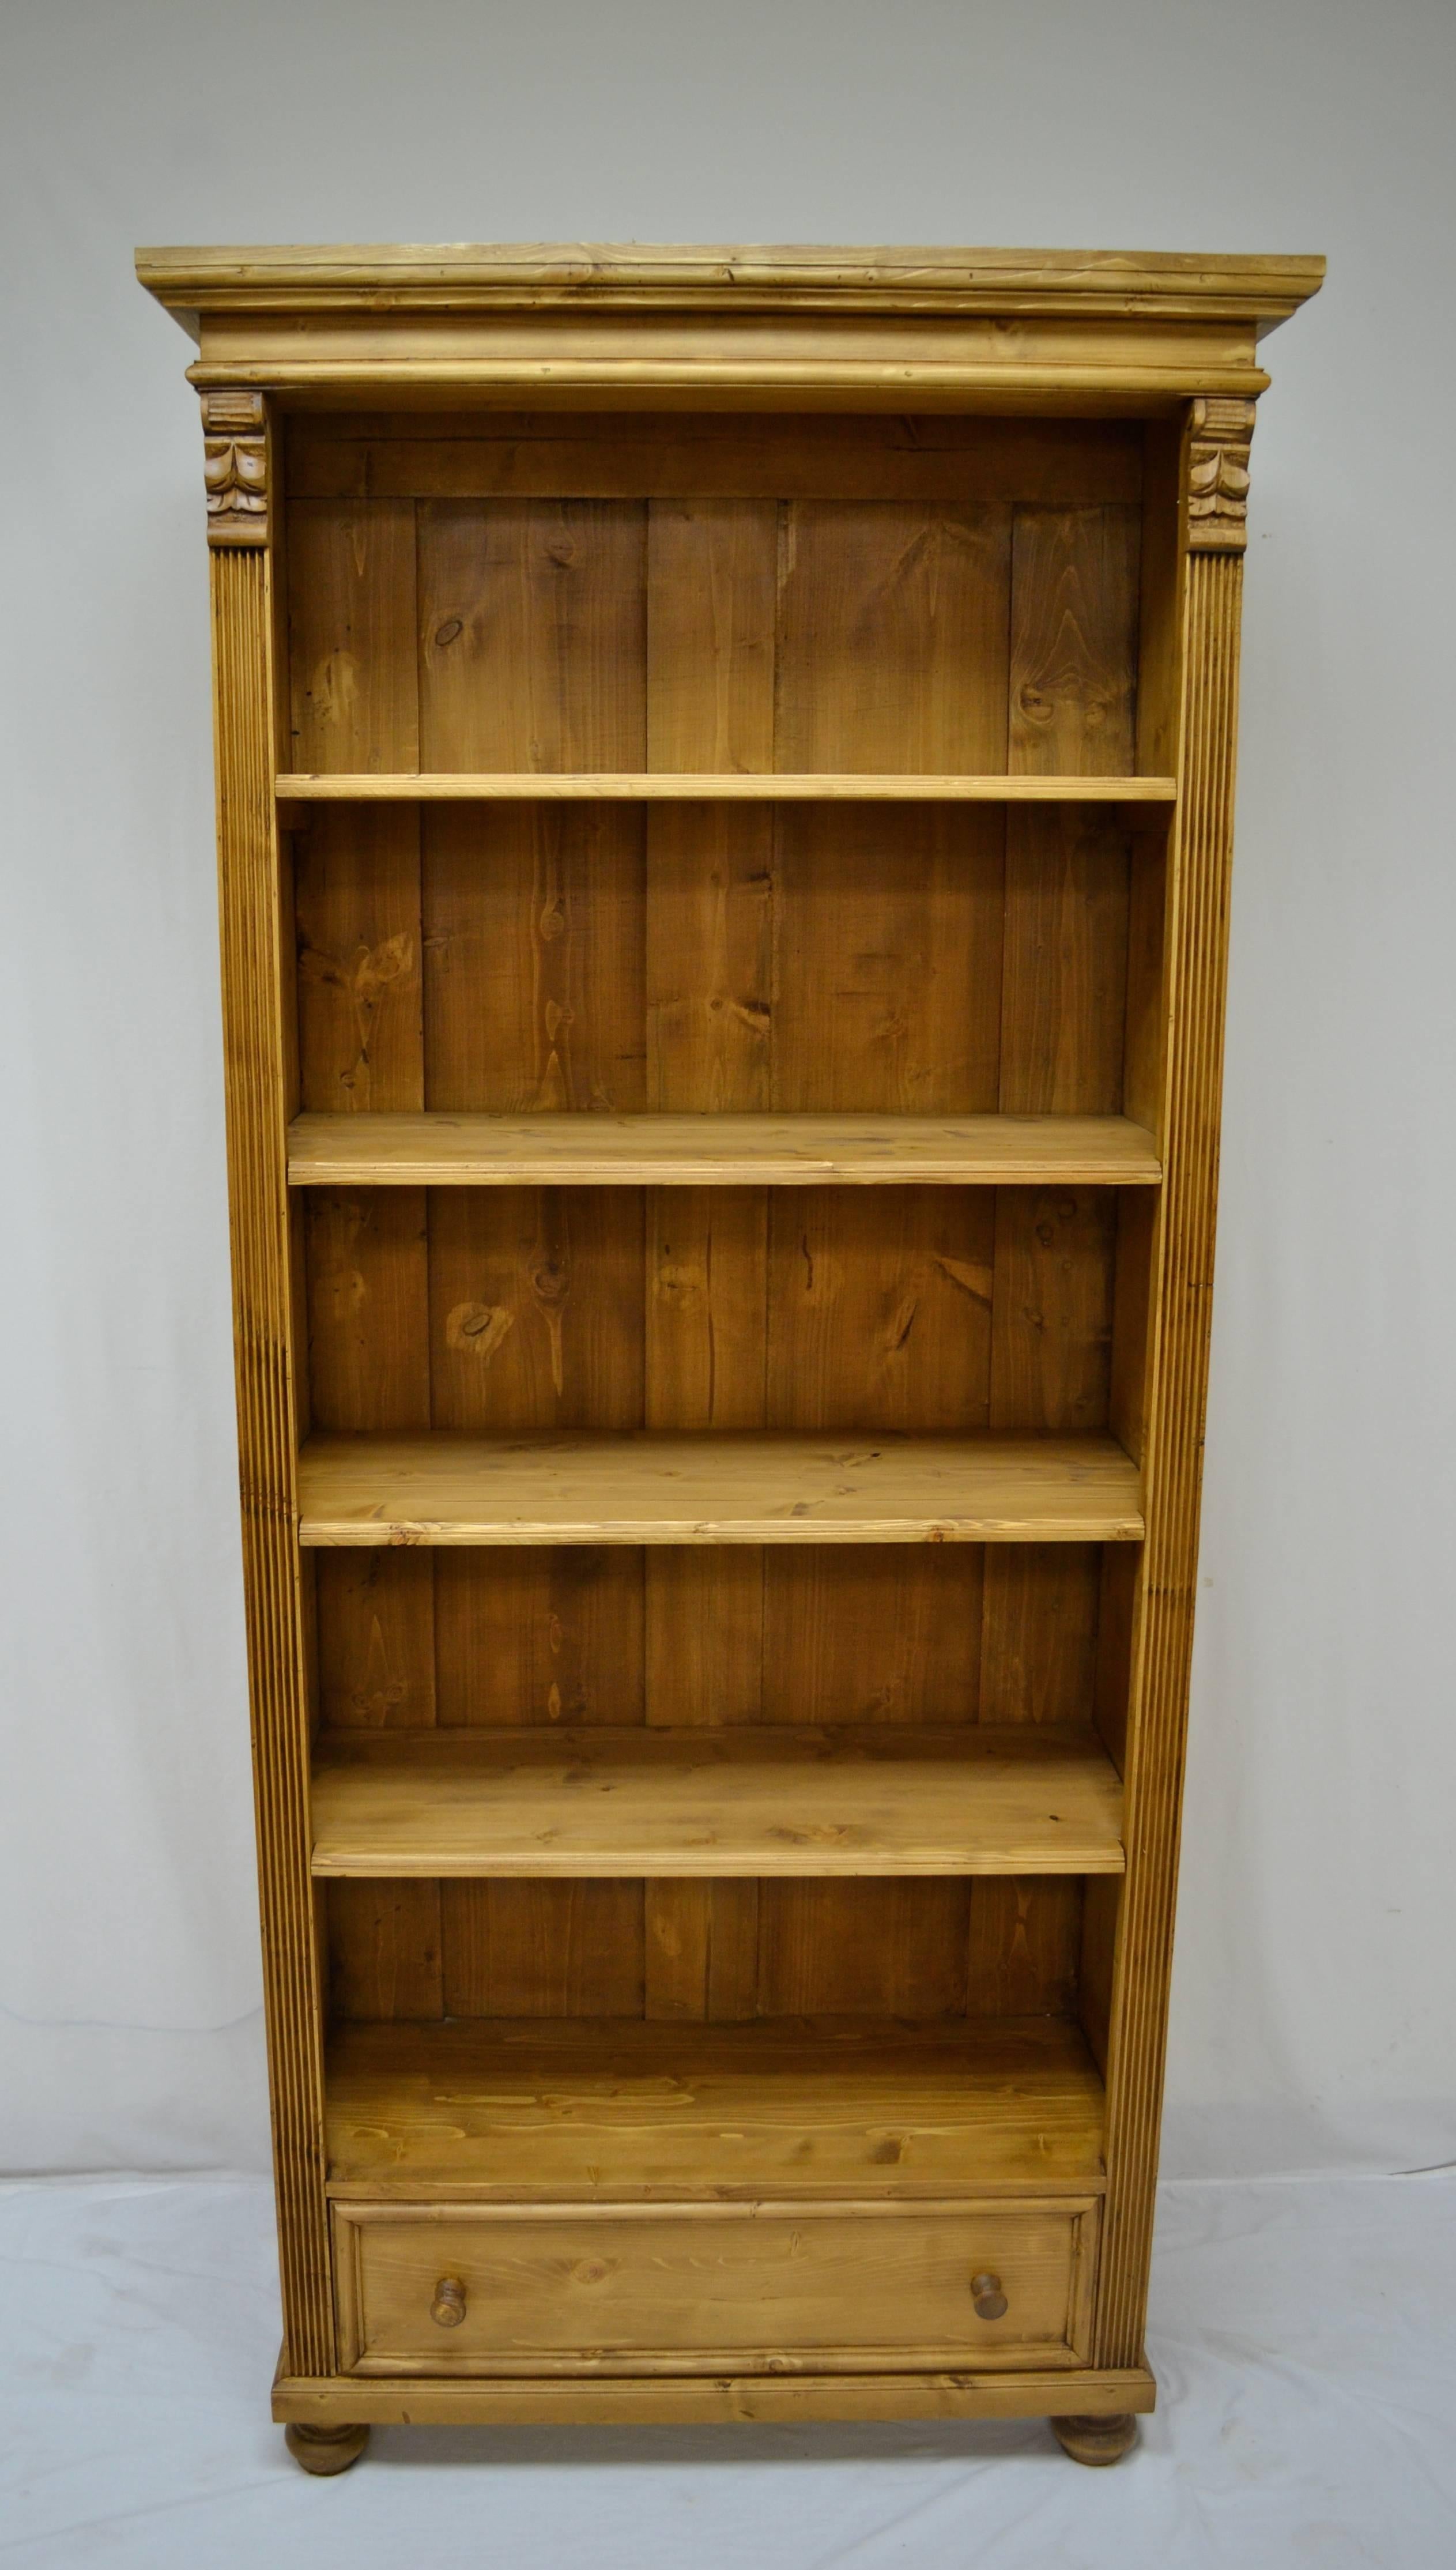 Hungarian Pine Open Bookcase with Drawer